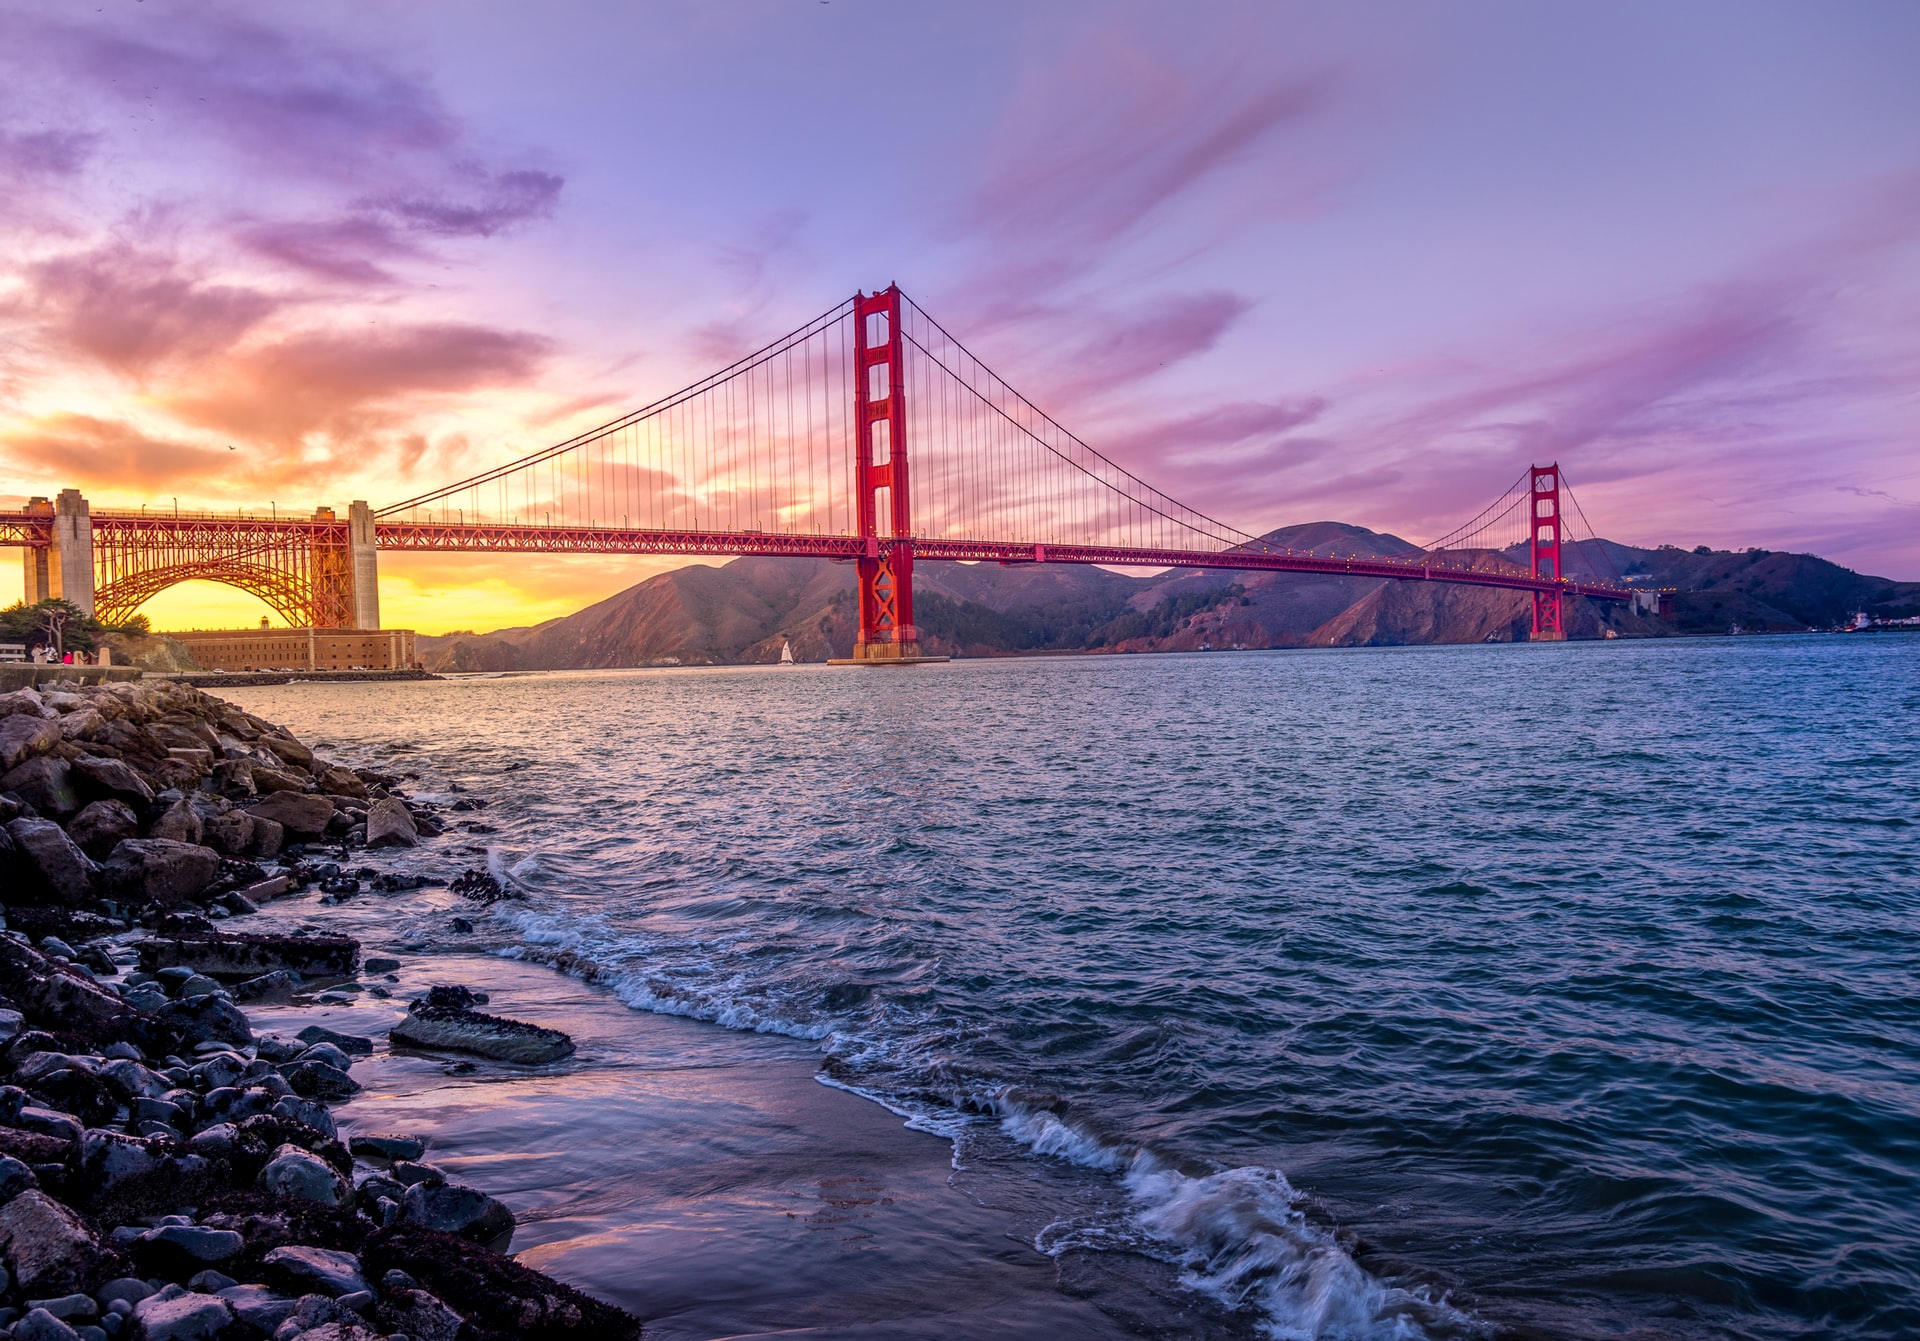 Crissy Field, a place to visit in San Francisco